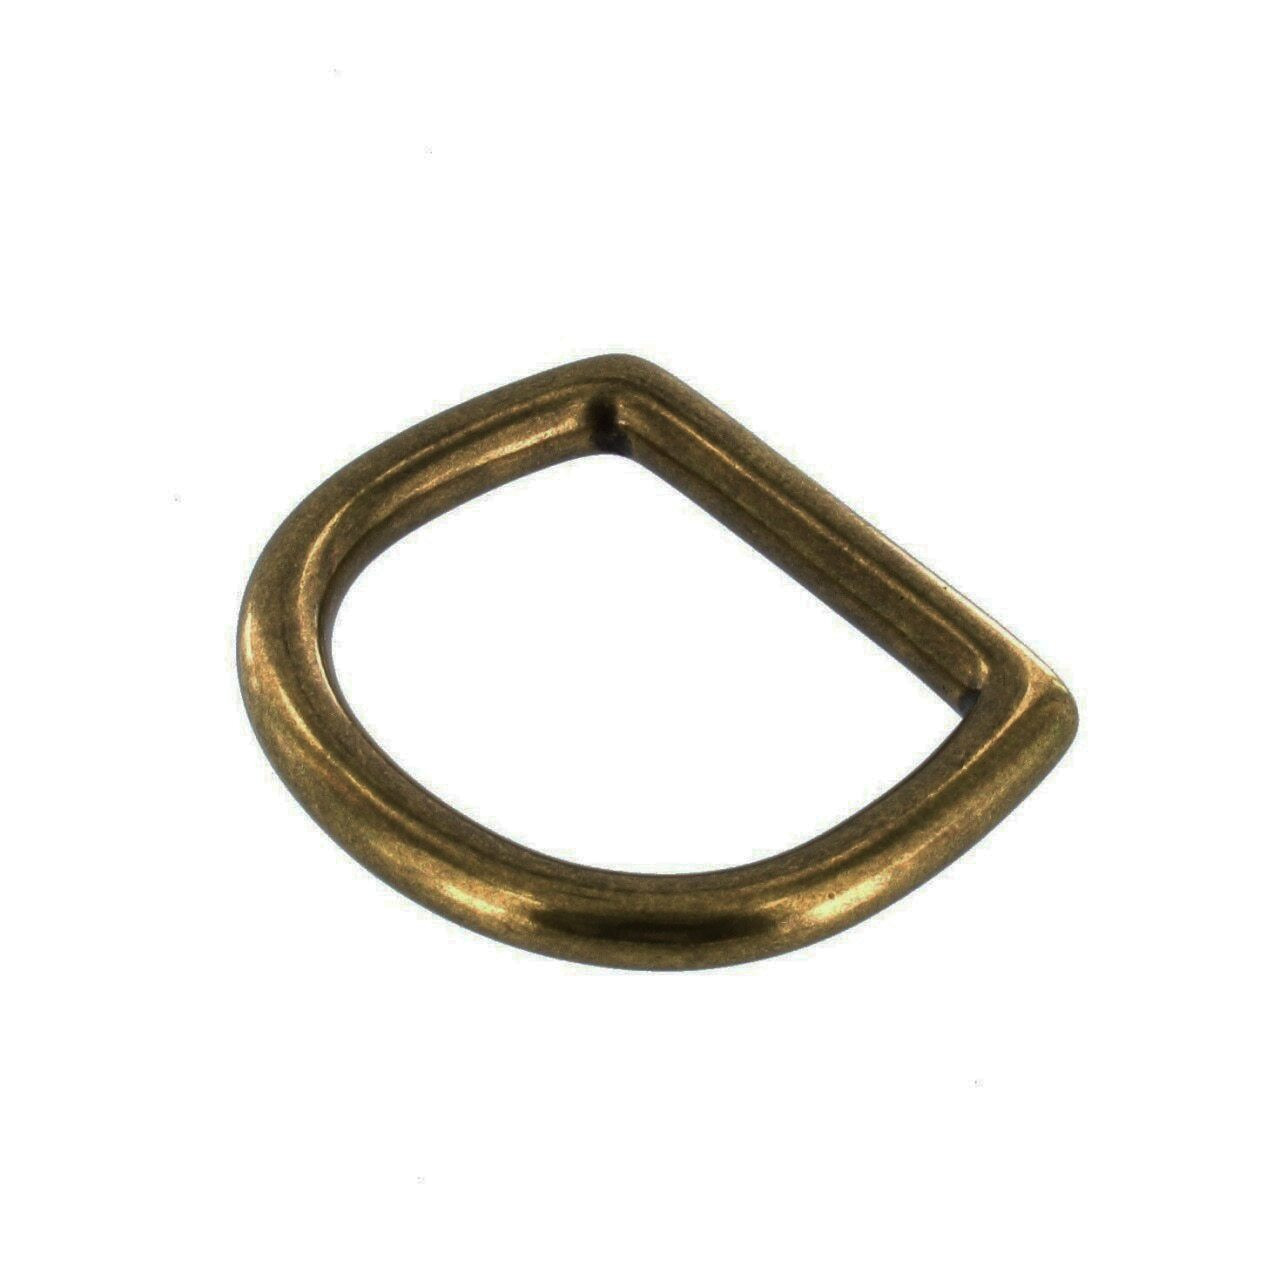 Solid Brass D-Rings